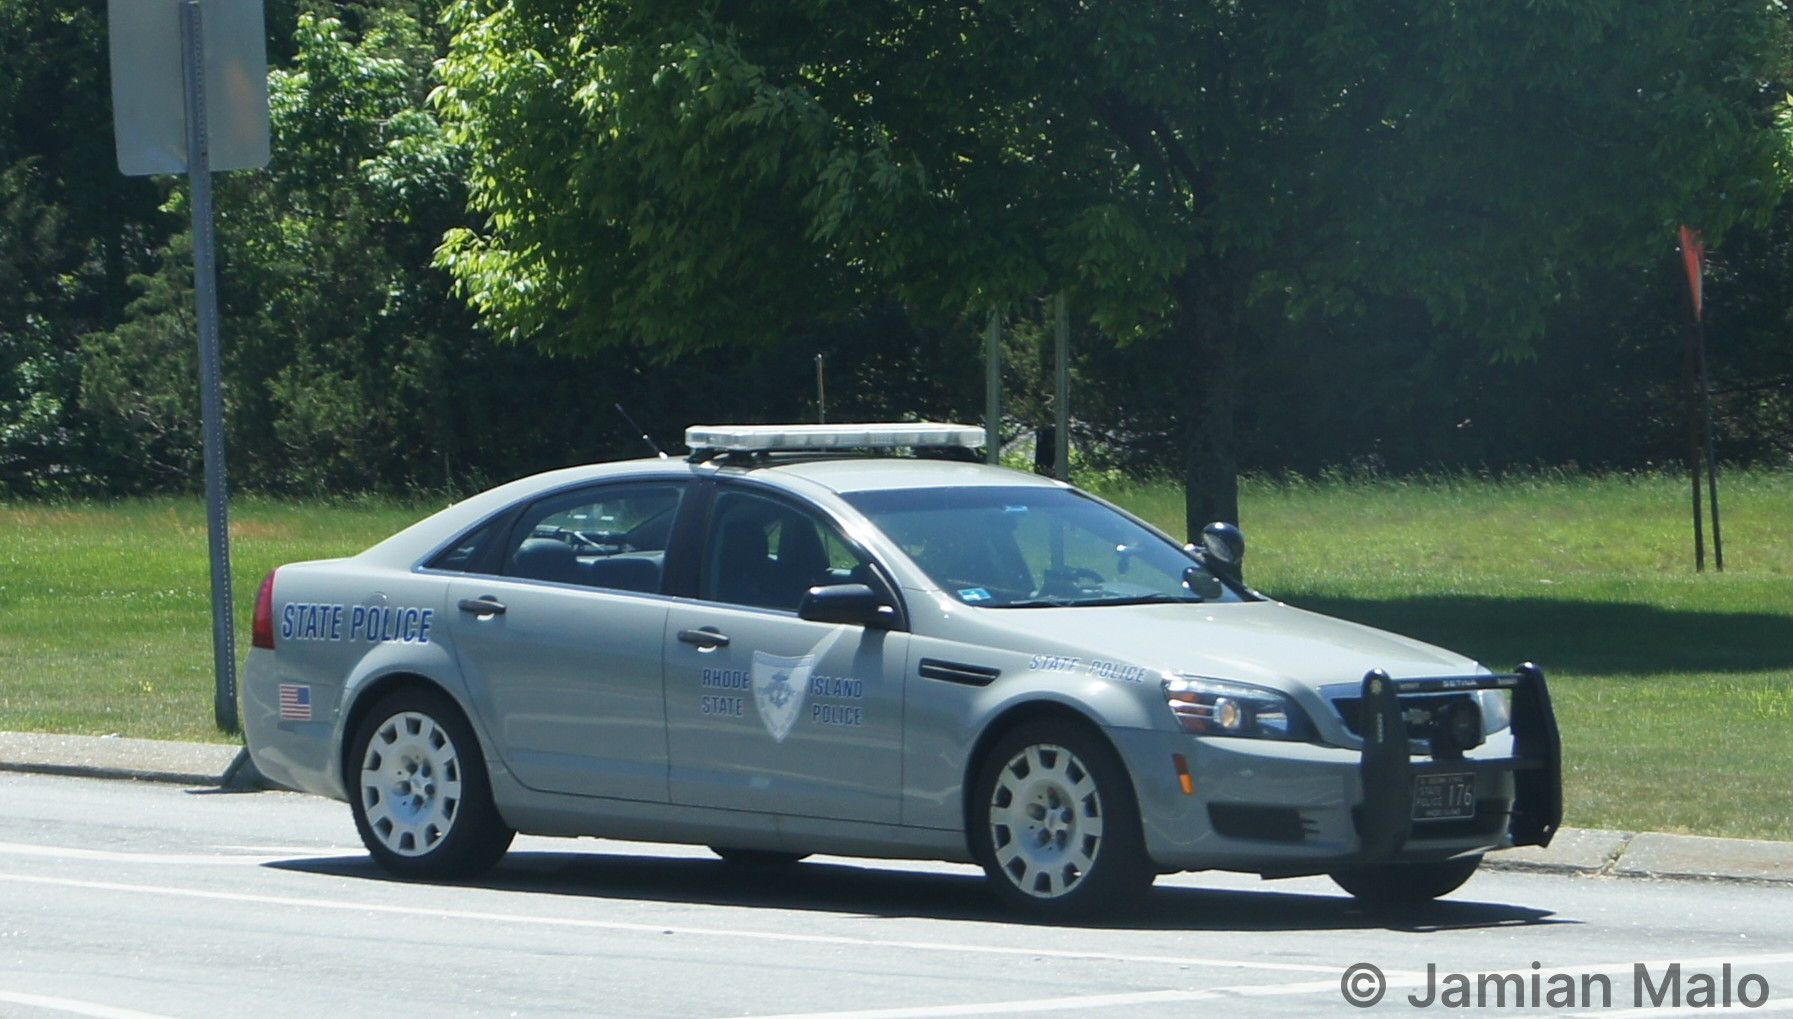 A photo  of Rhode Island State Police
            Cruiser 176, a 2013 Chevrolet Caprice             taken by Jamian Malo